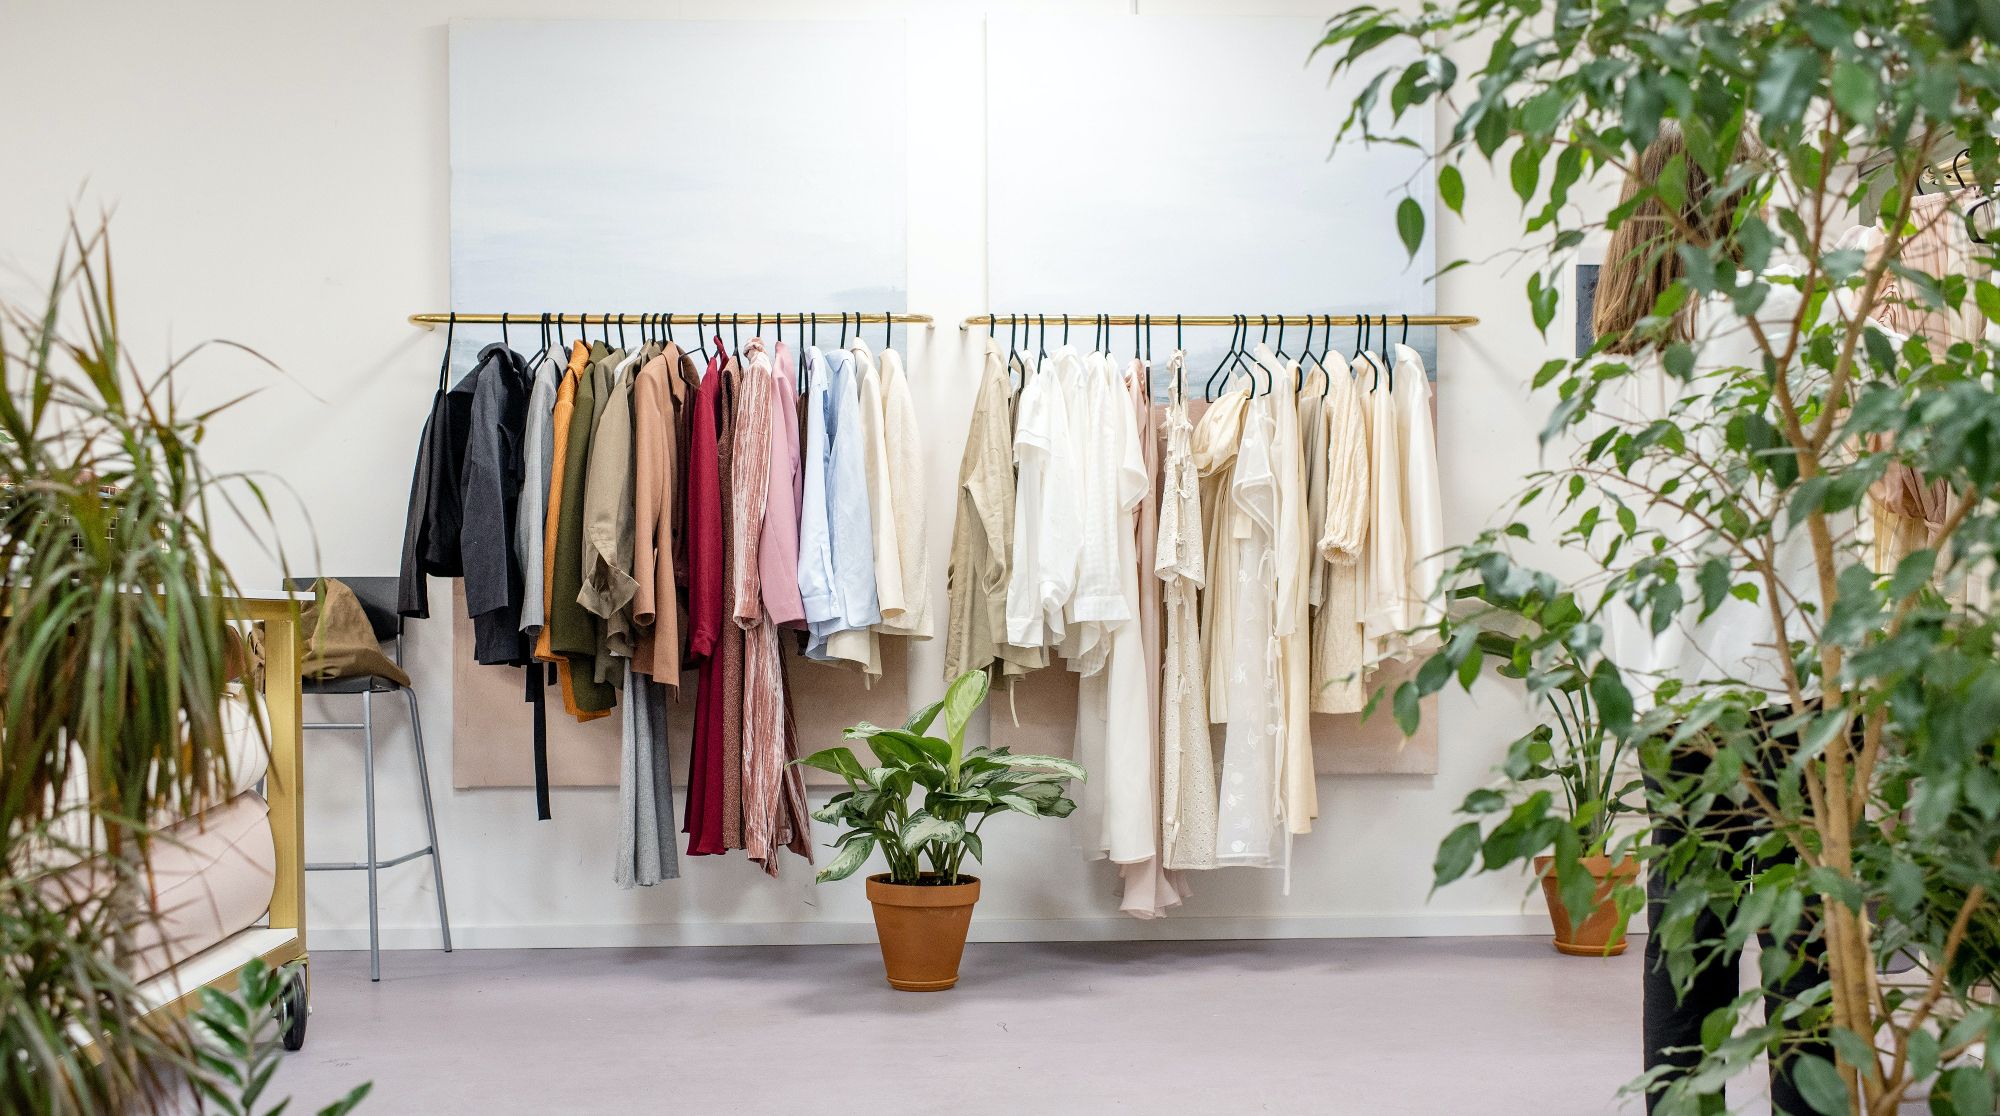 image of clothing rack in store surrounded by plants